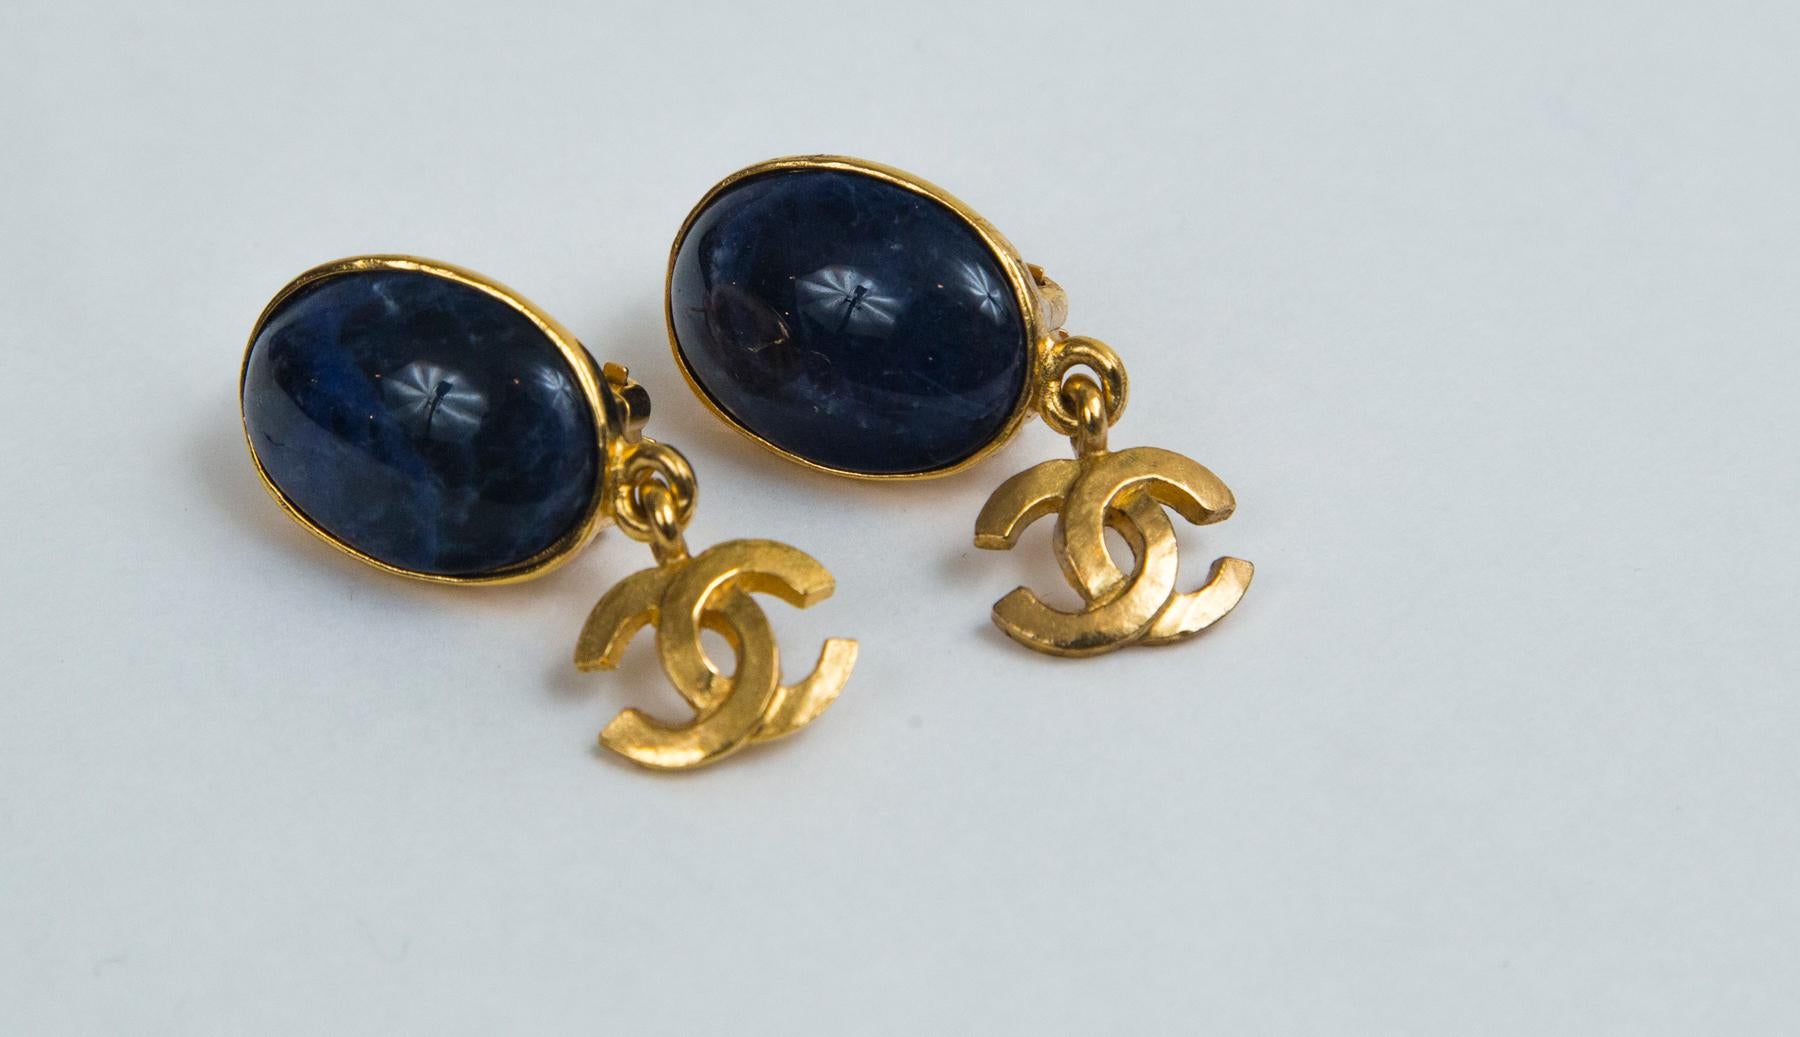 Chanel Navy Blue and Gold Earrings, Stamped with Chanel, CC, Made in France, 95 A (Autumn)